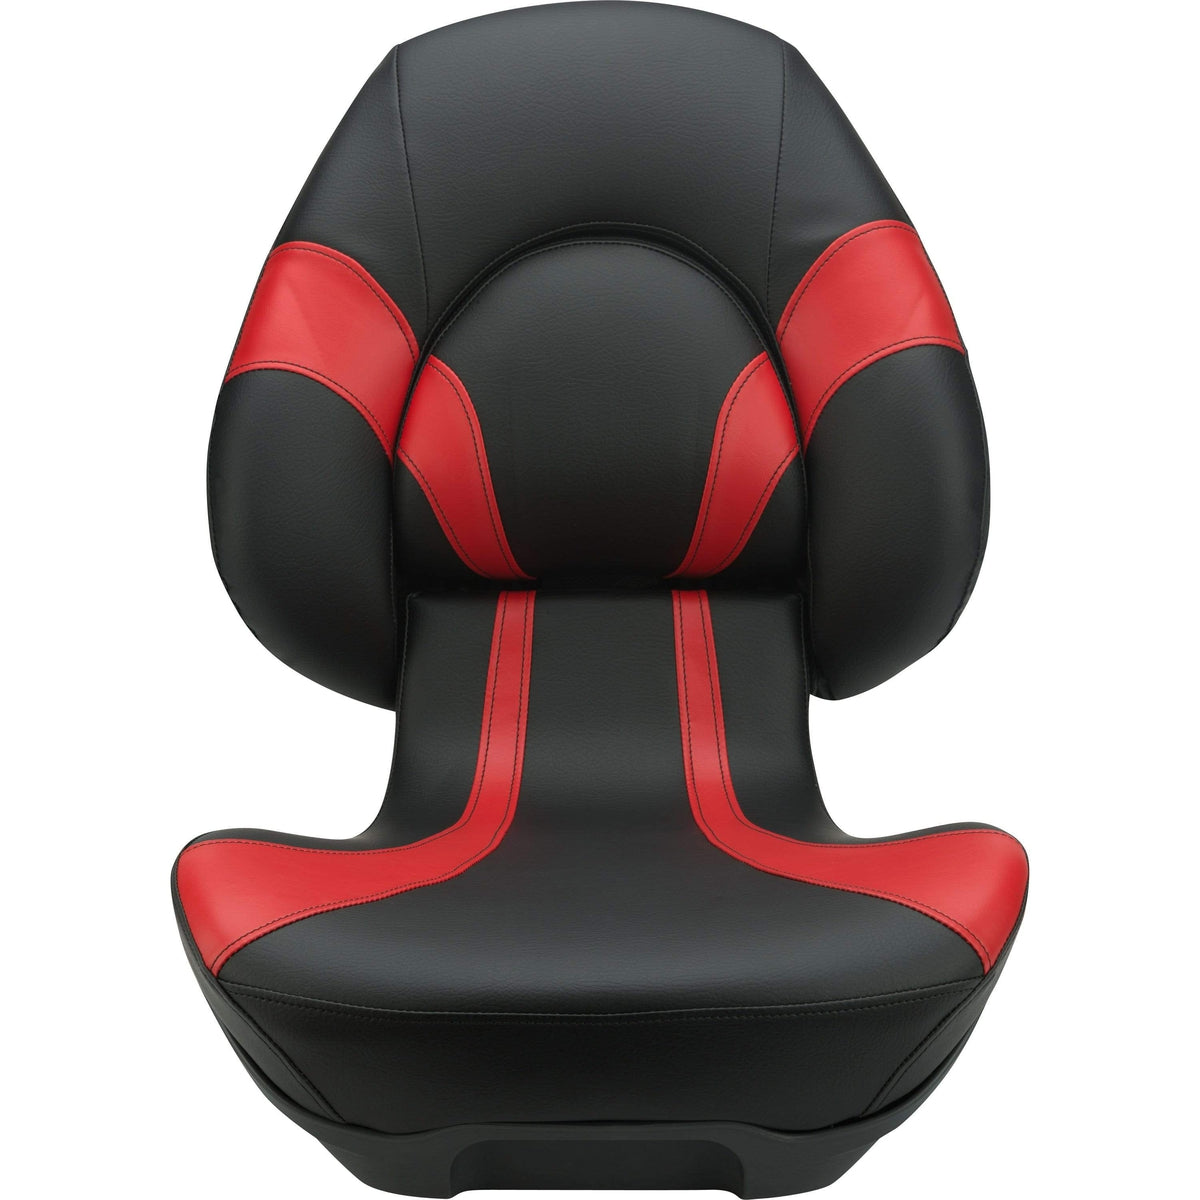 Attwood Marine Not Qualified for Free Shipping Attwood Centrix X 97S Seat Black/Red #97S05RD-2